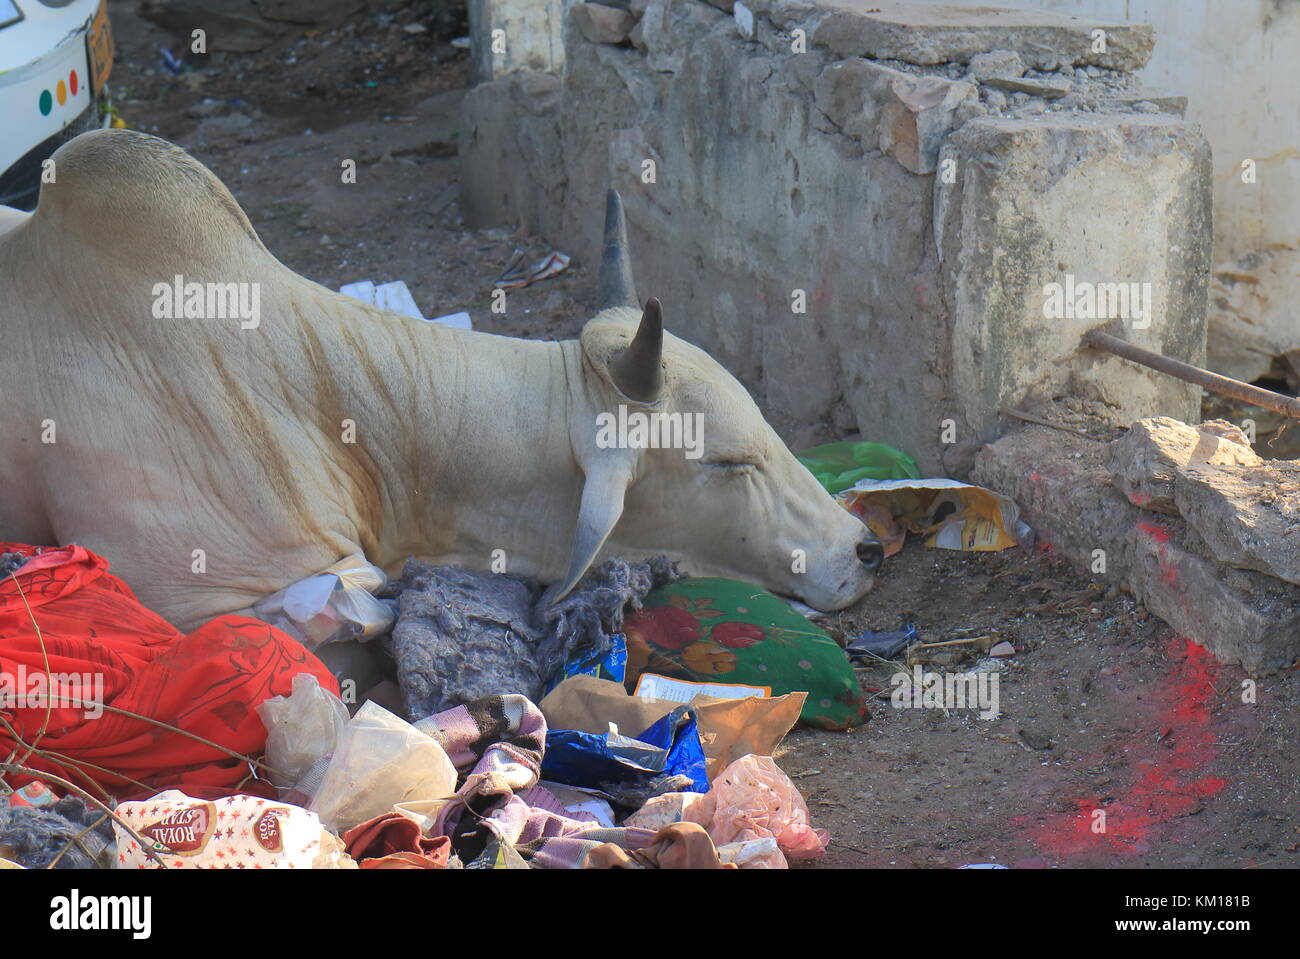 Street cow rests on street rubbish in Udaipur India. Stock Photo